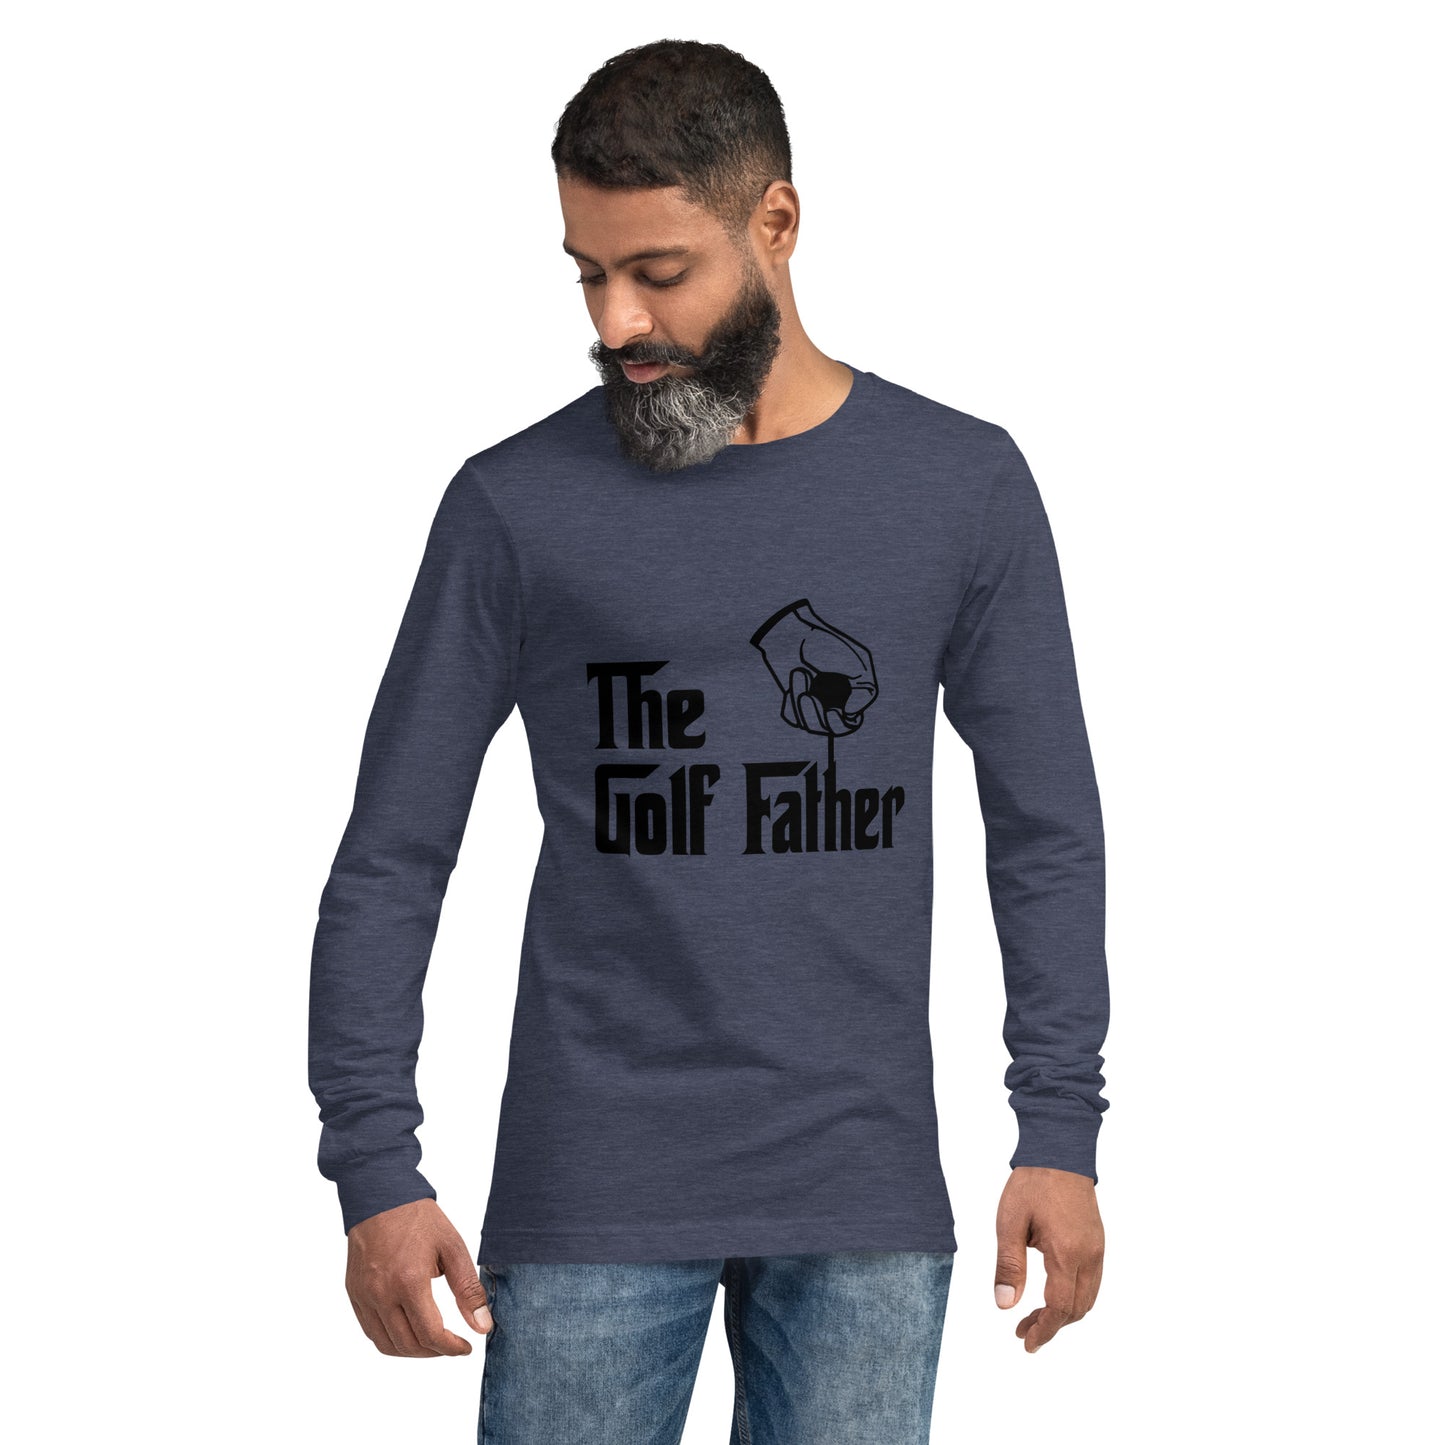 The Golf Father Long Sleeve Shirt